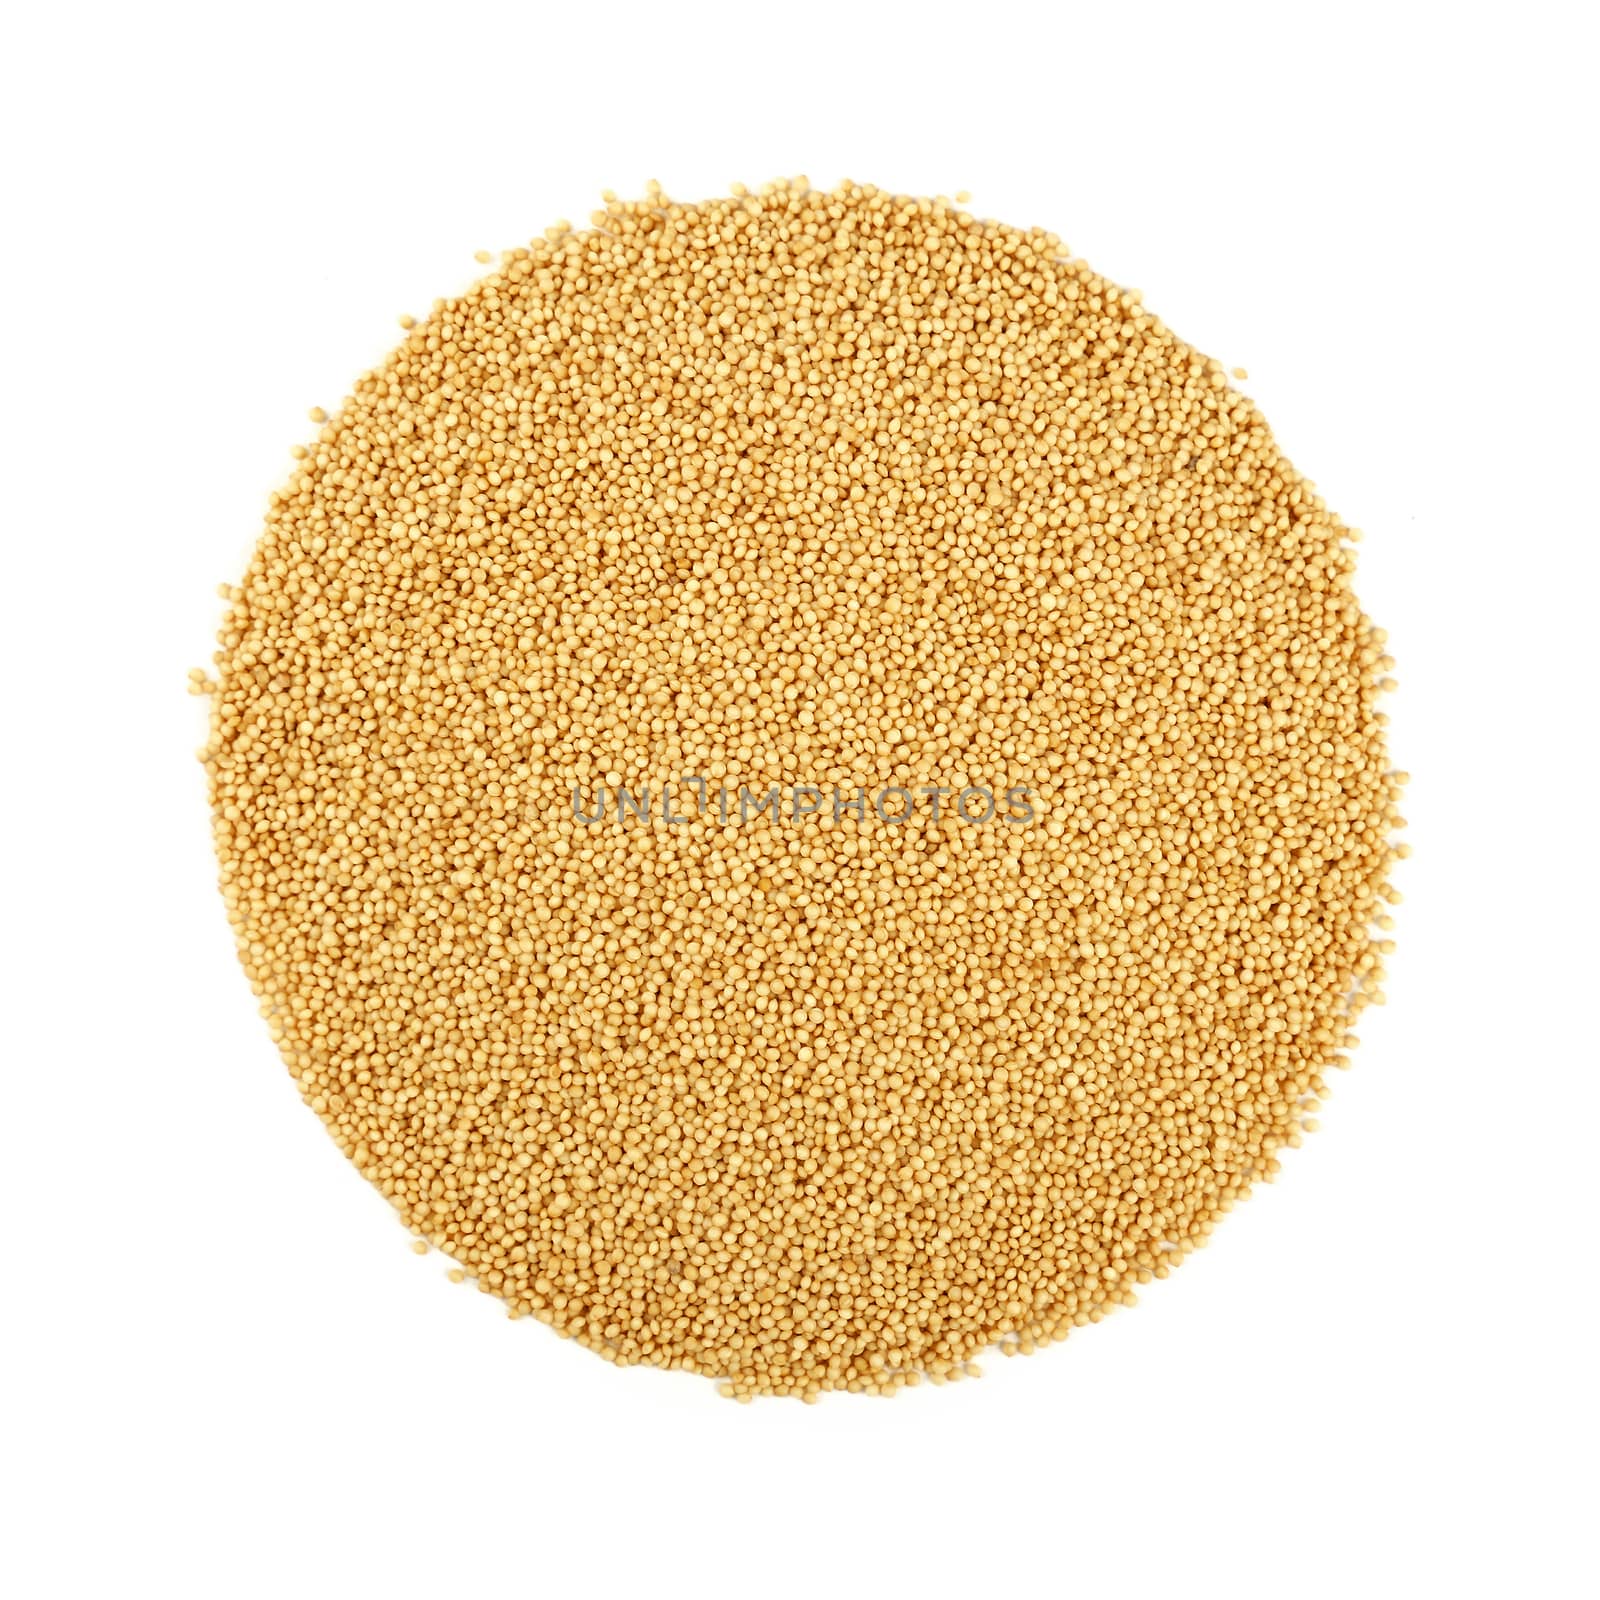 Round shaped amaranth seeds isolated on white by BreakingTheWalls